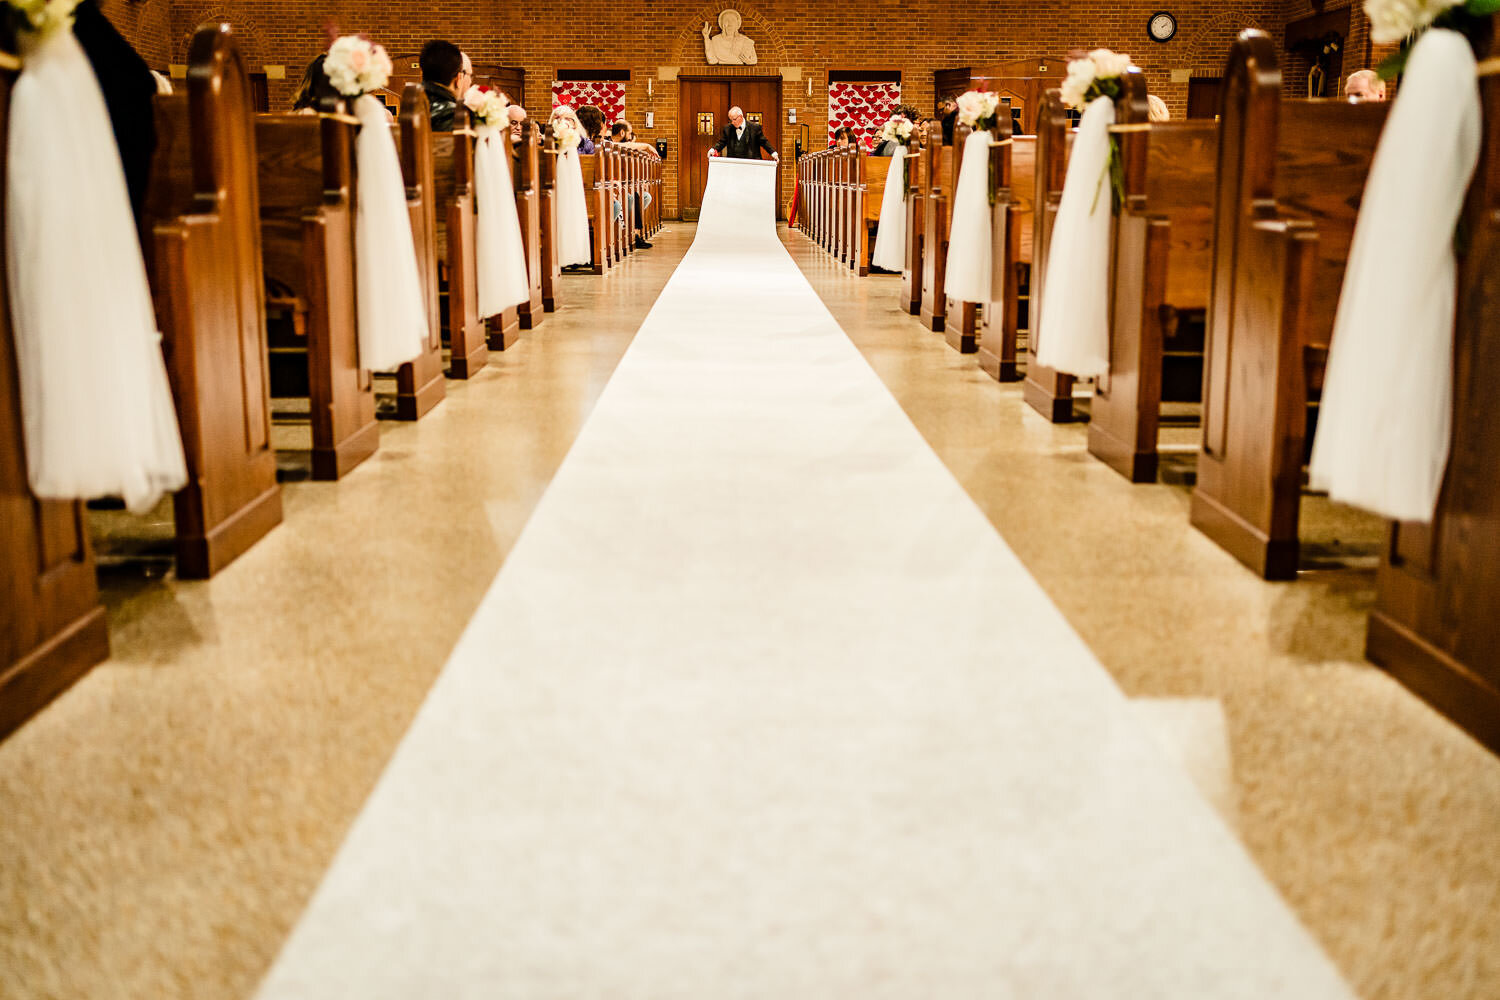 Aisle Runners is set up before the ceremony at St. Margaret Cath